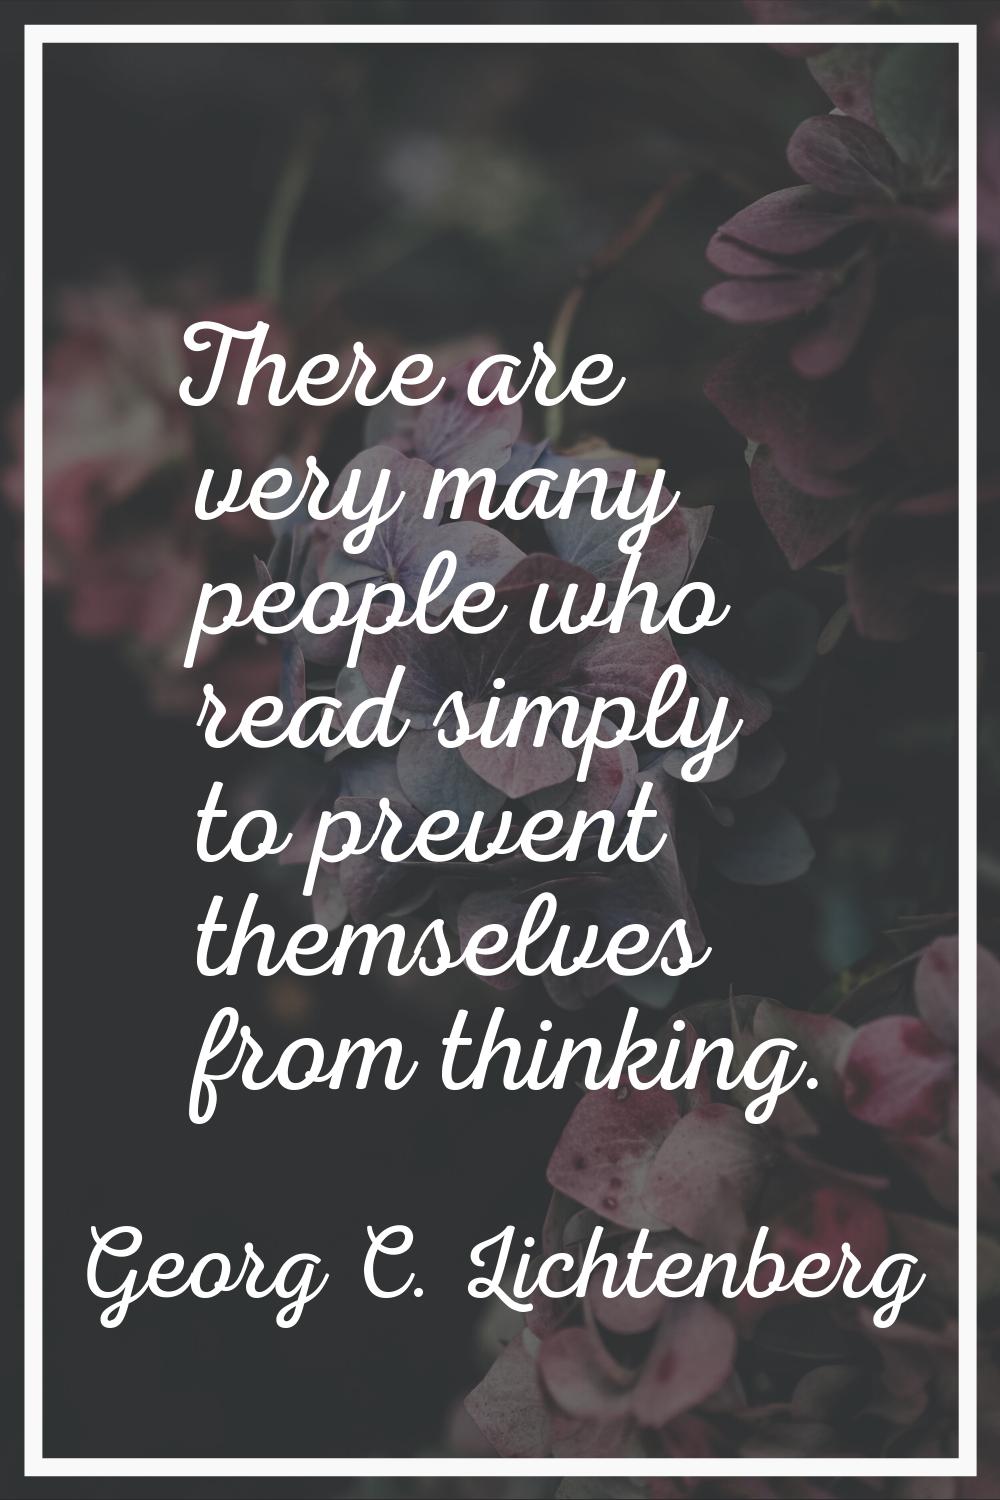 There are very many people who read simply to prevent themselves from thinking.